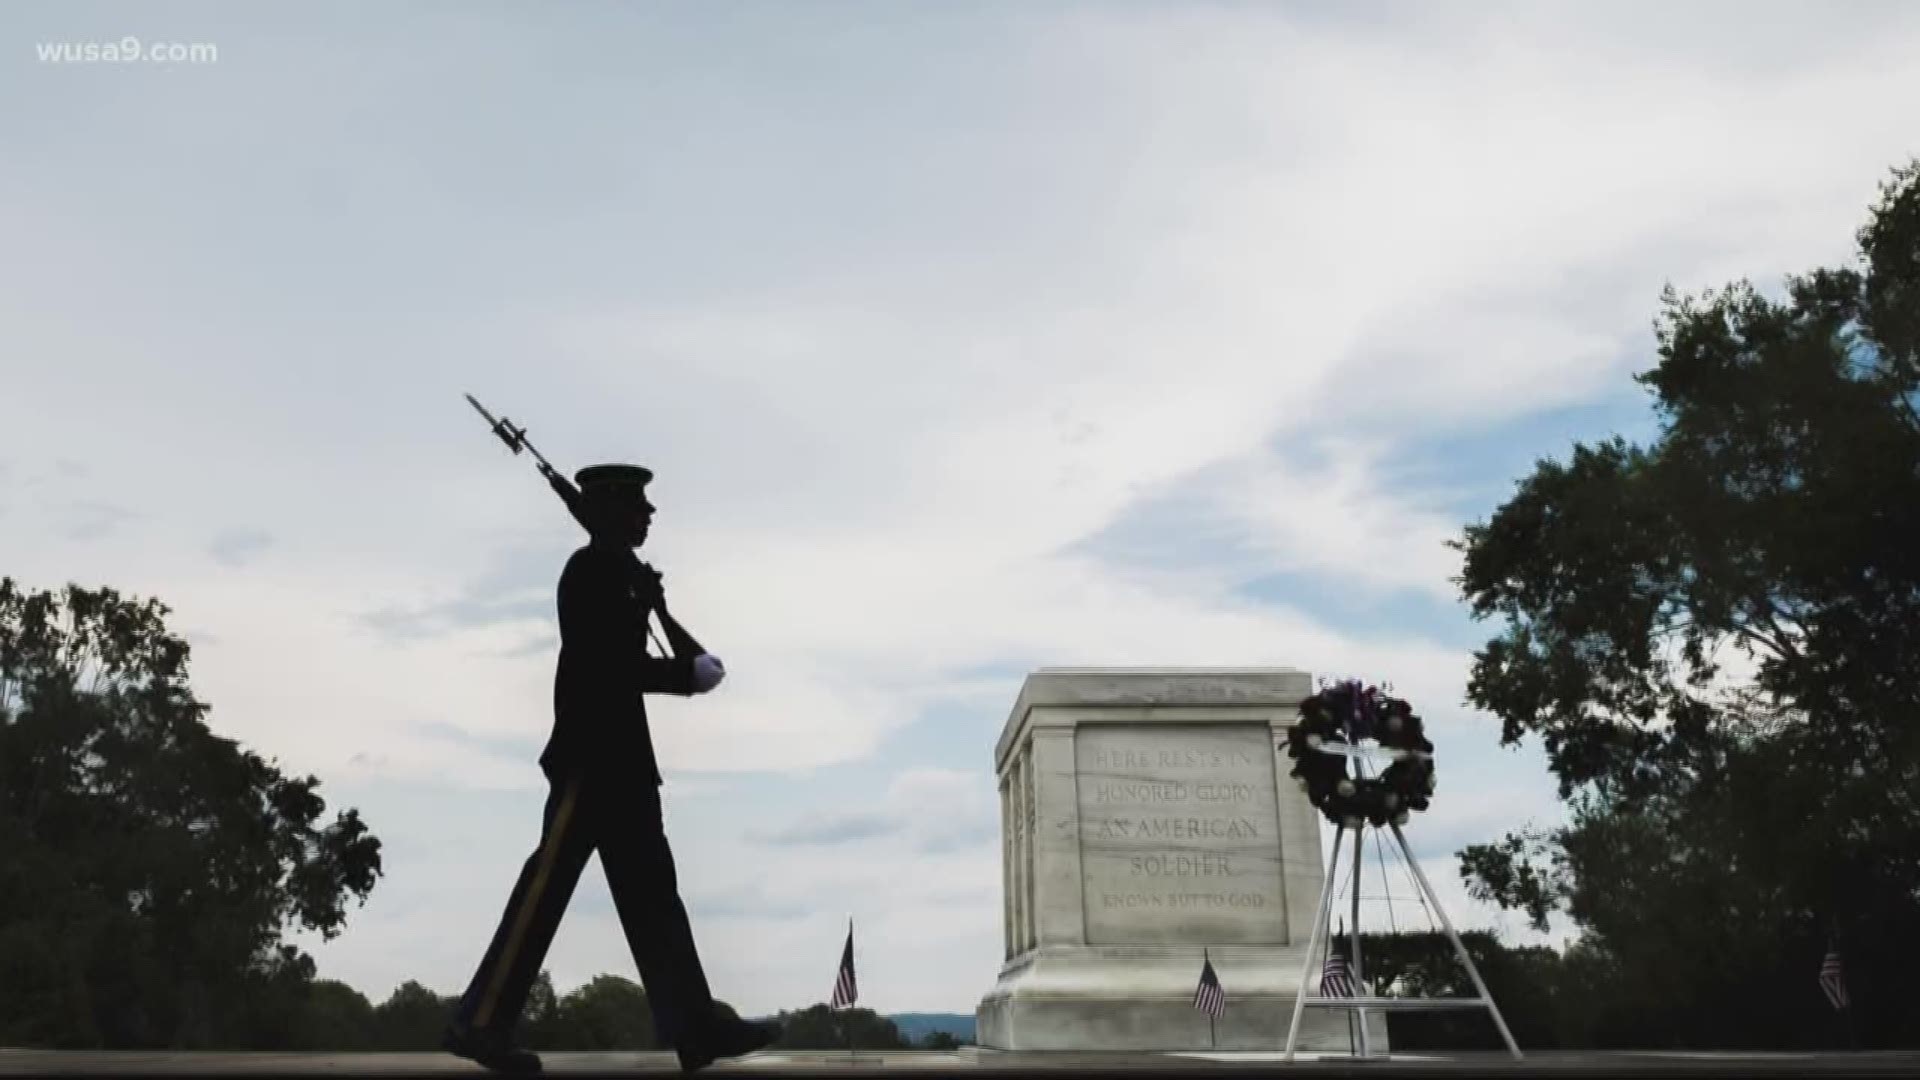 The Army’s 3rd U.S. Infantry Regiment, more commonly known as the Old Guard, continues to watch over the Tomb 24/7.